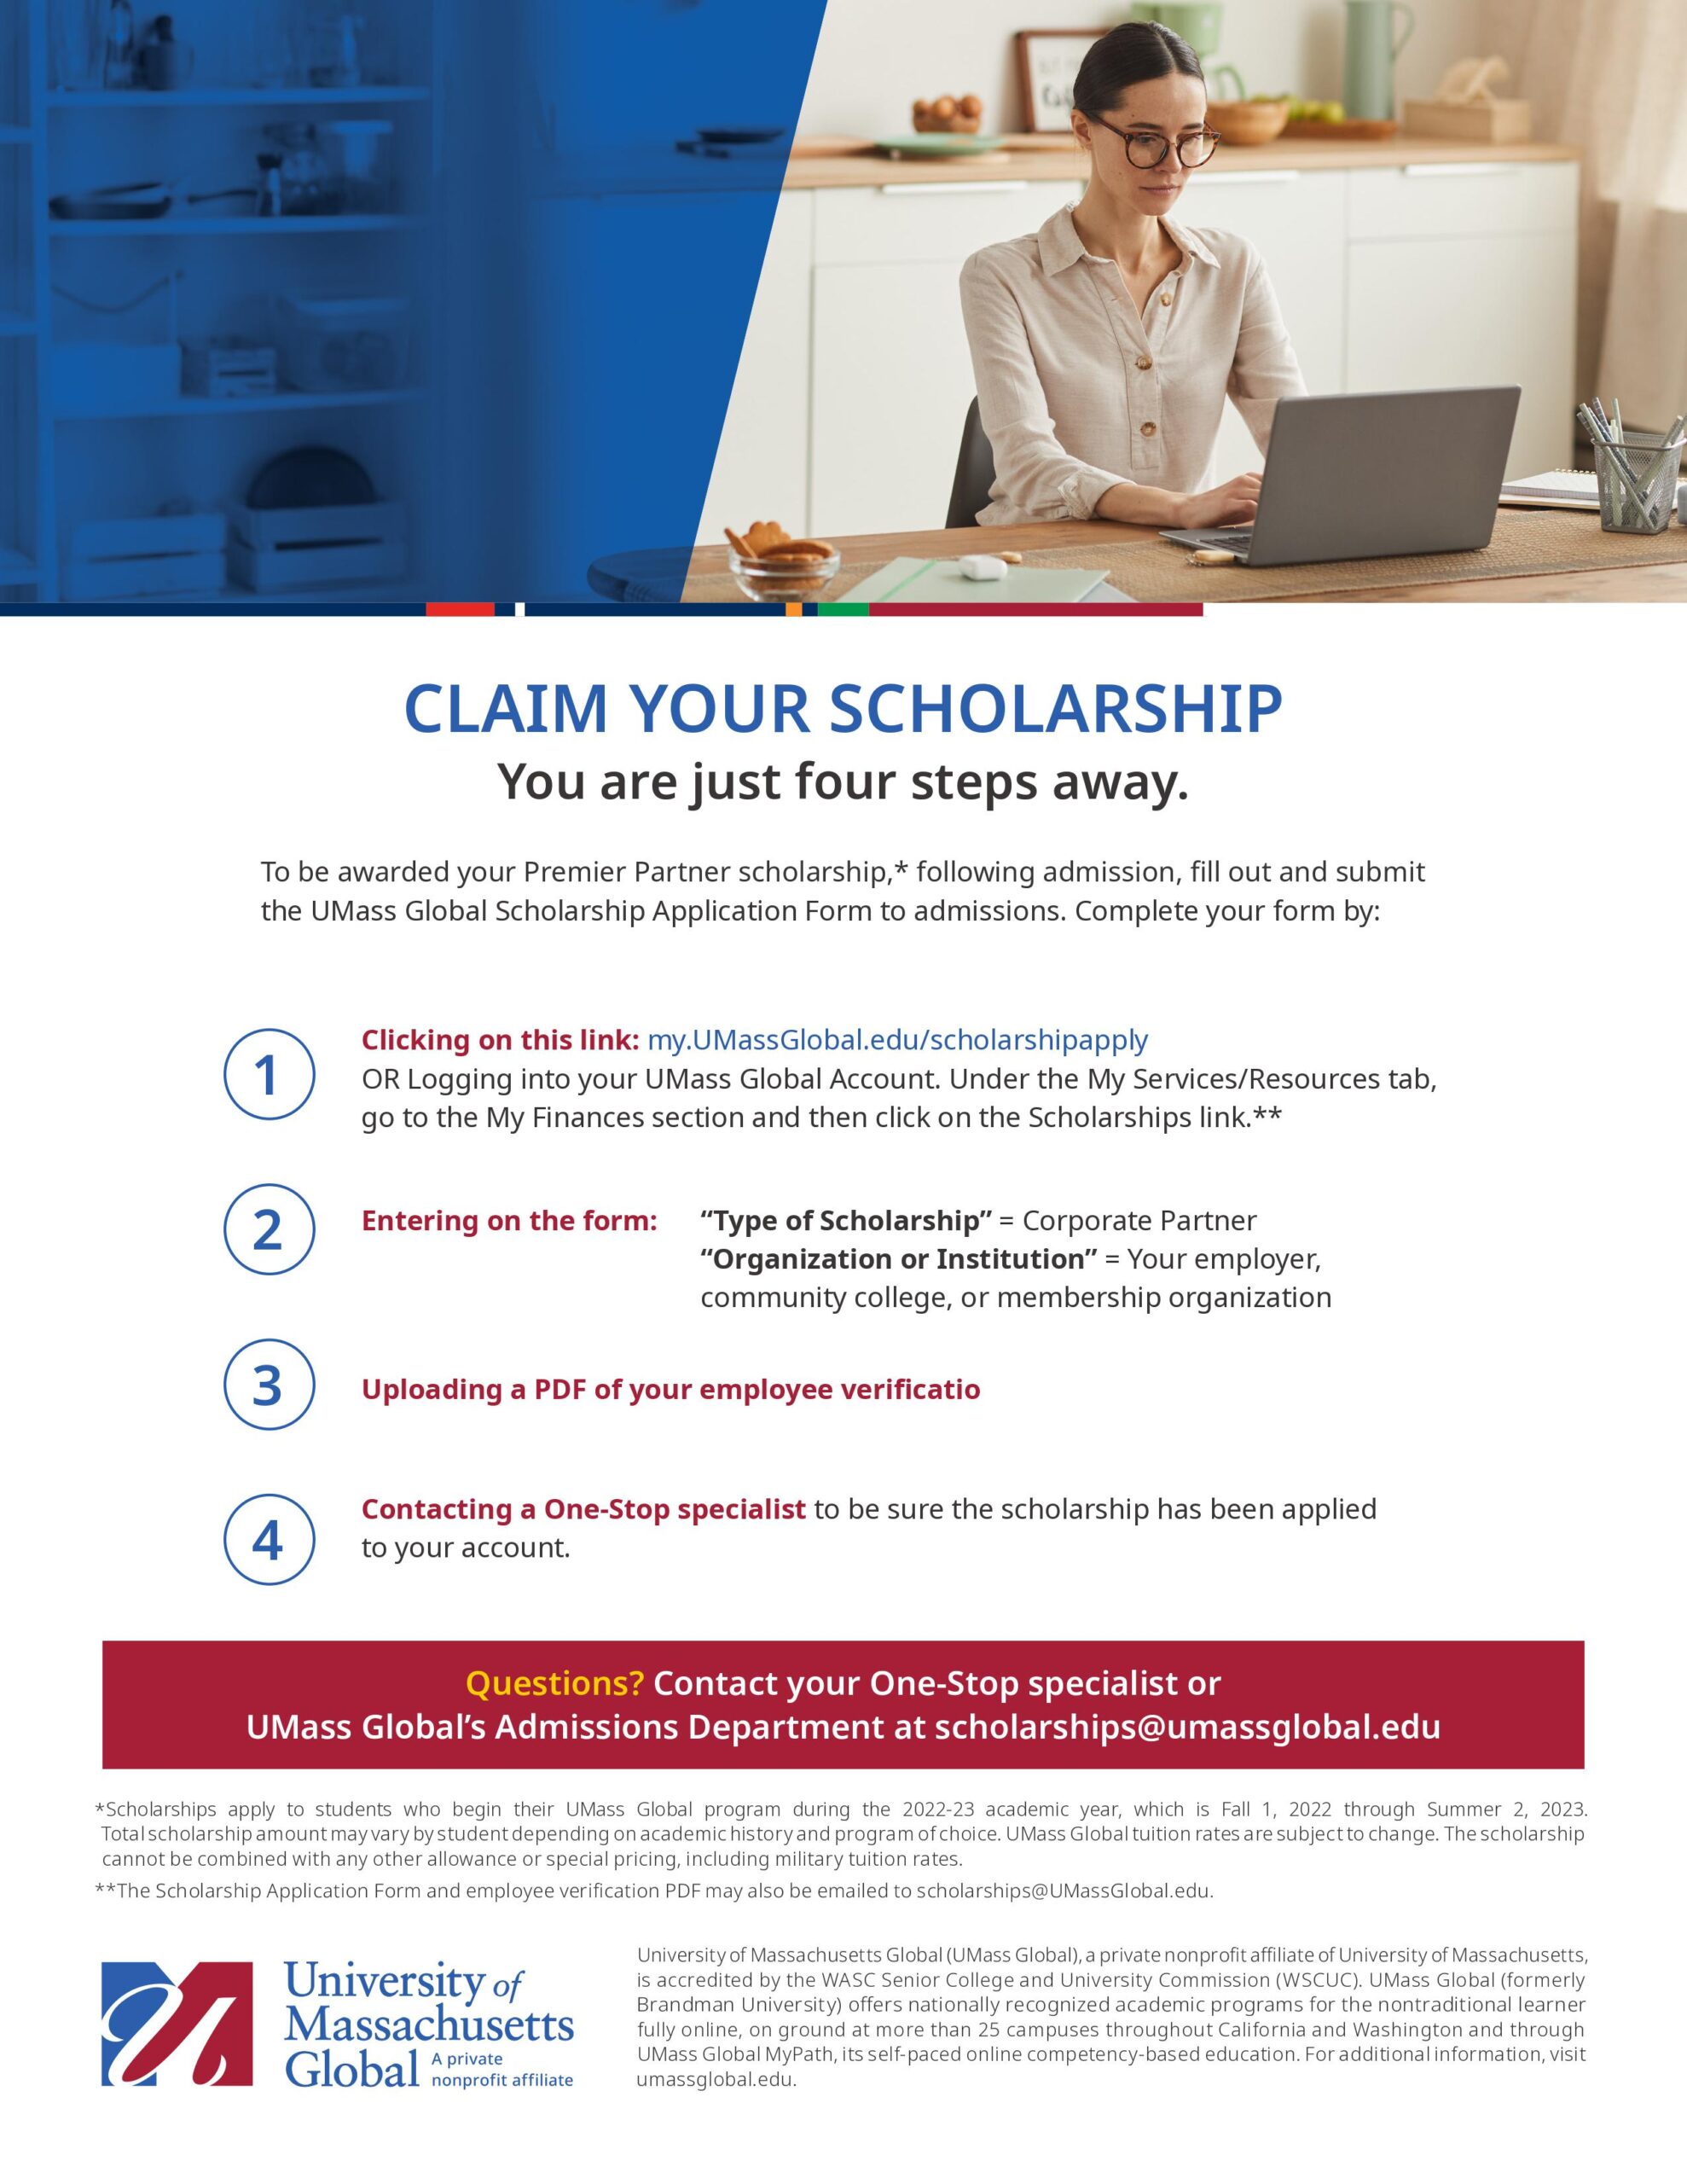 Claim your scholarship at UMass Global once you are enrolled.